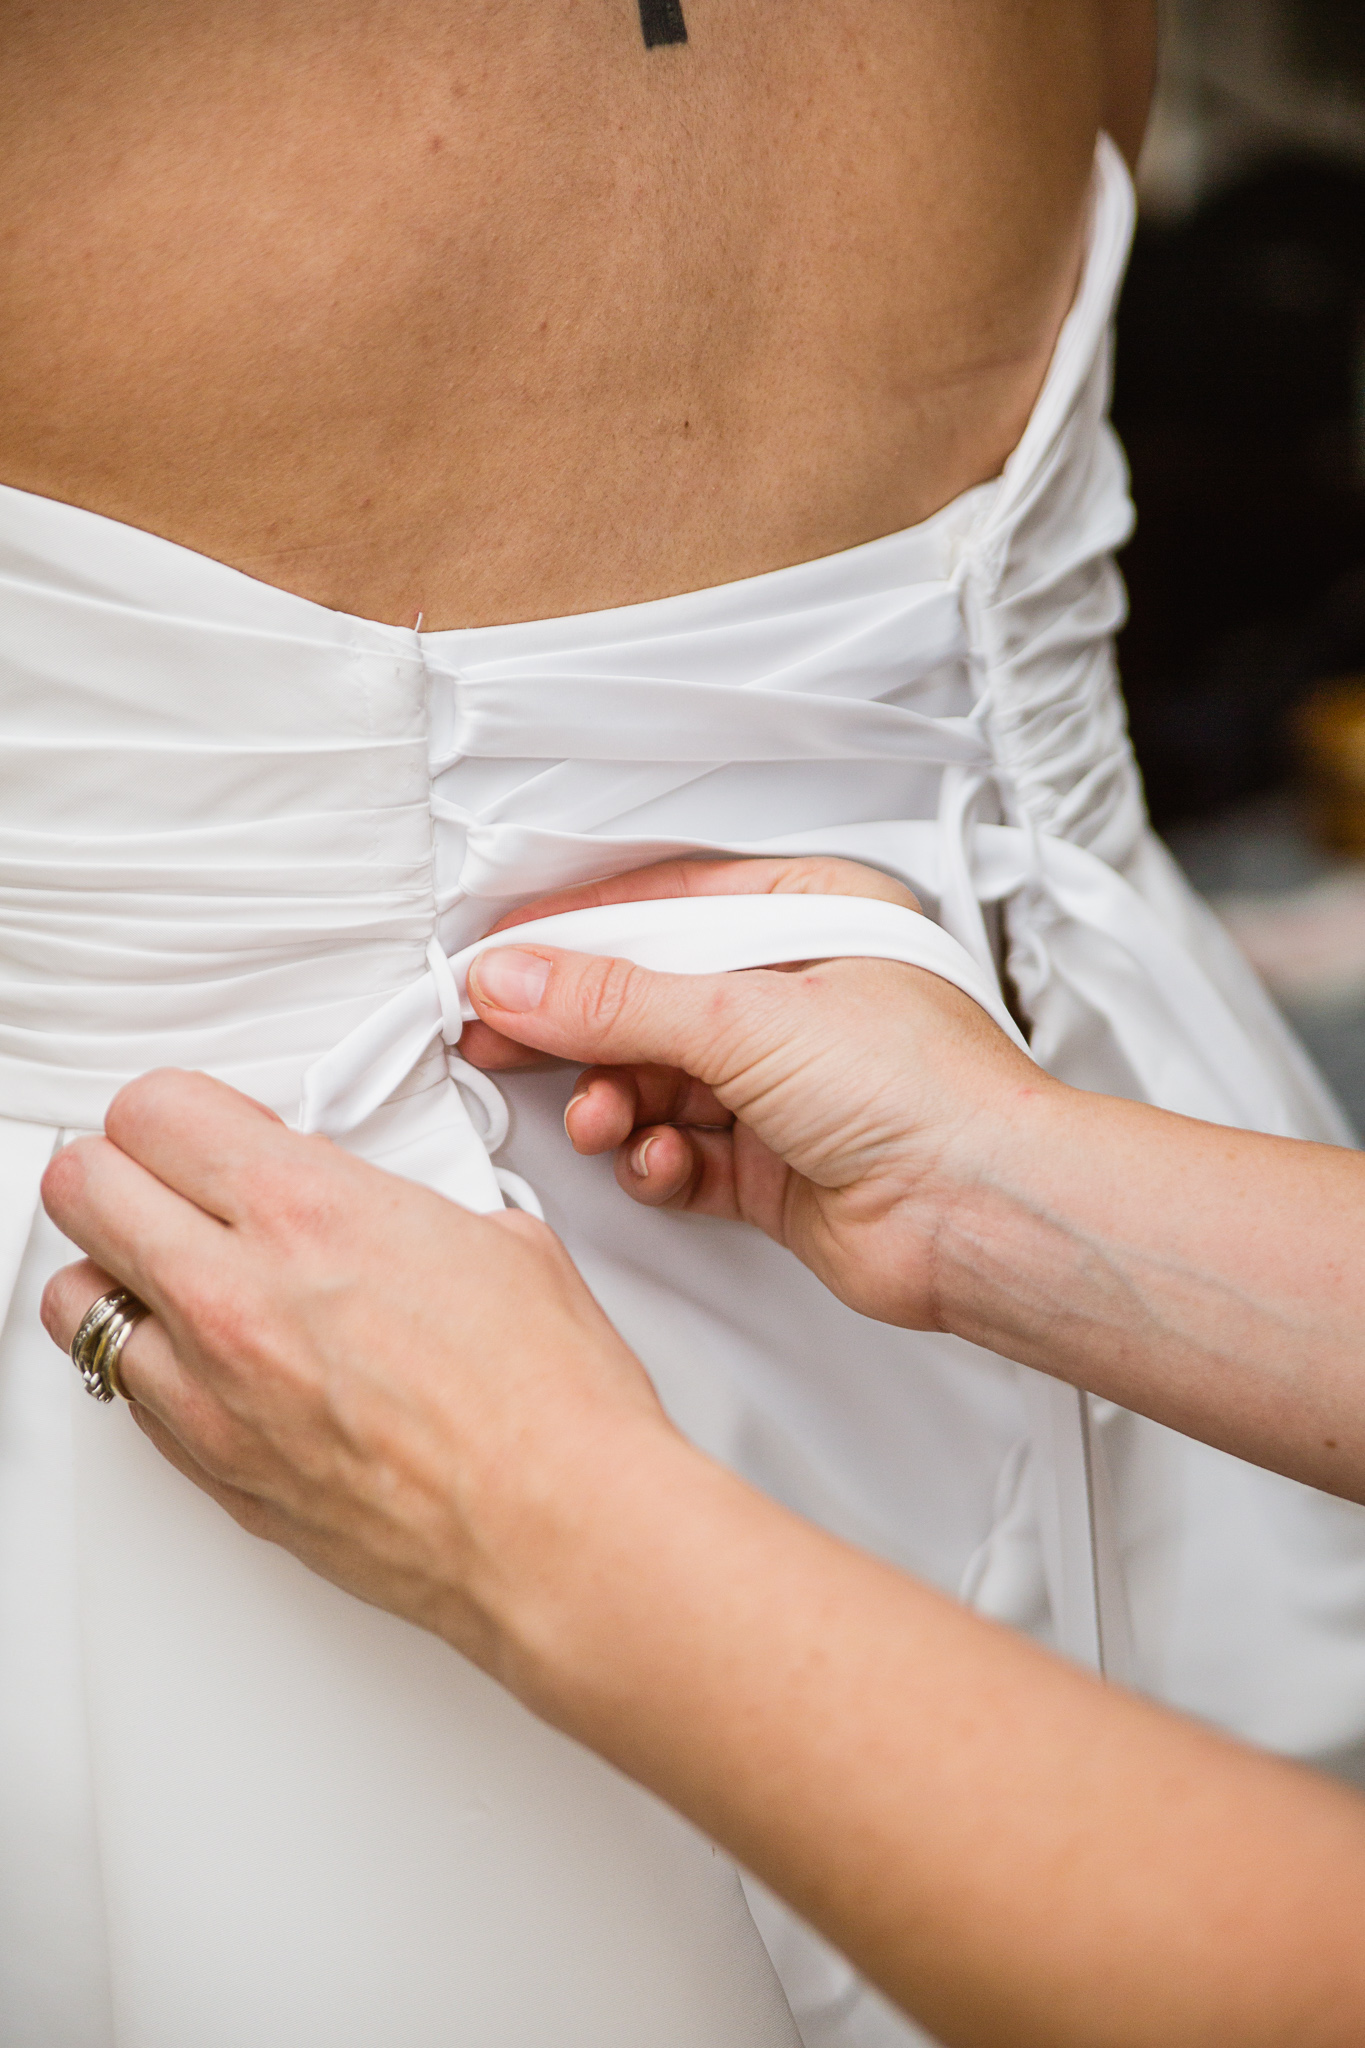 Bride's dress being laced up while getting ready for her wedding by photographer PMA Photography.